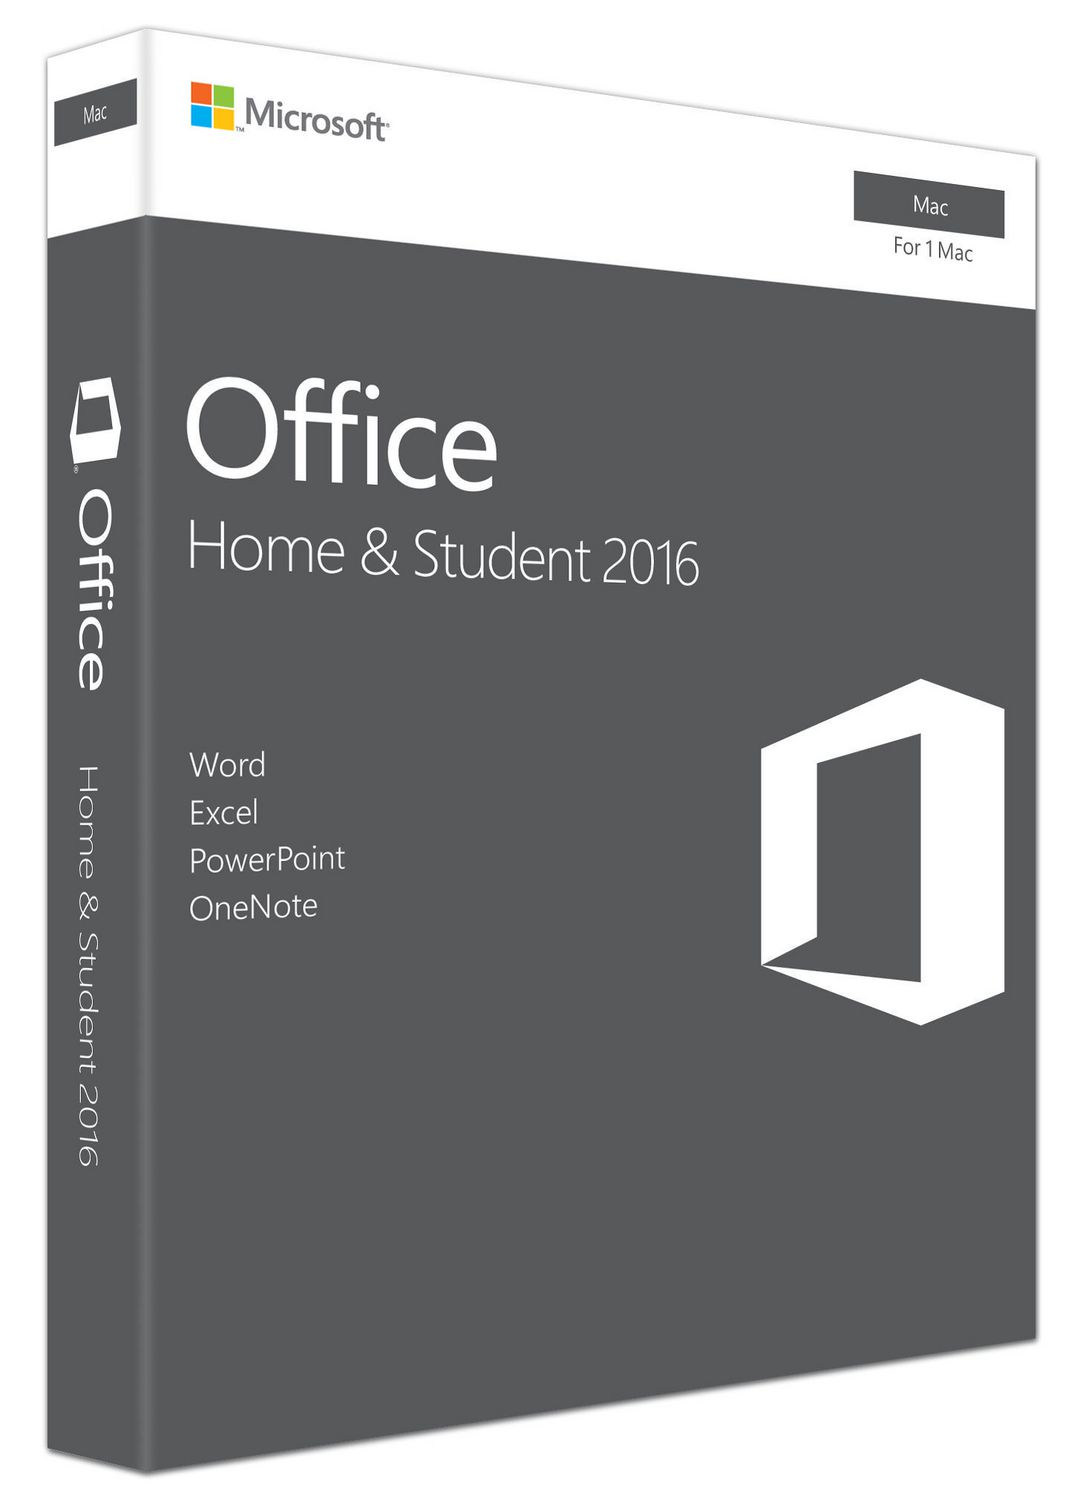 i need excel 2016 for mac